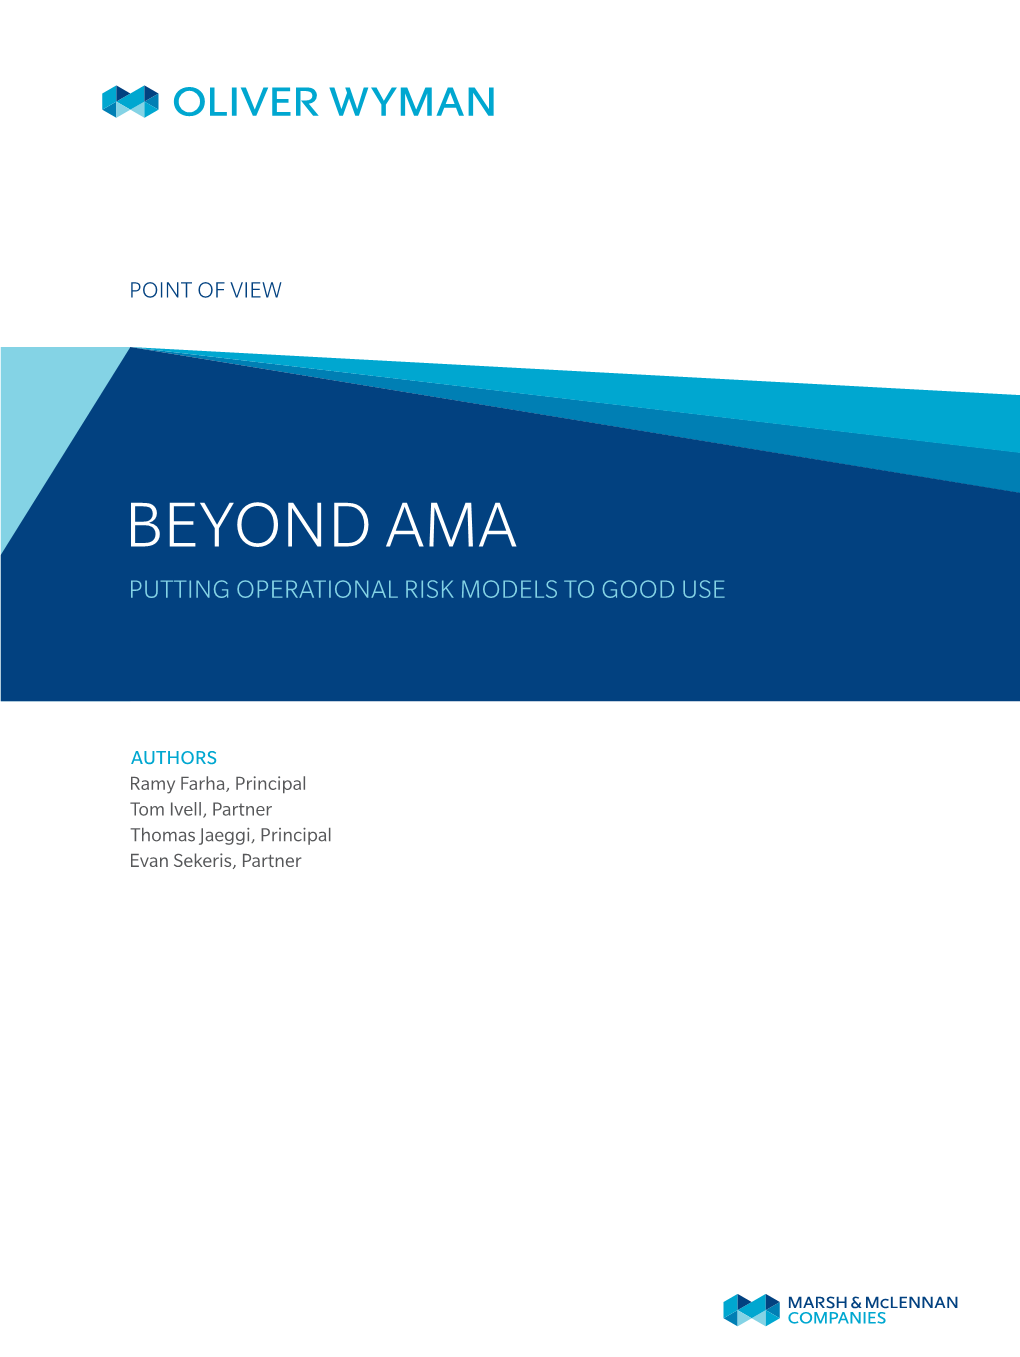 Beyond AMA: Putting Operational Risk Models to Good